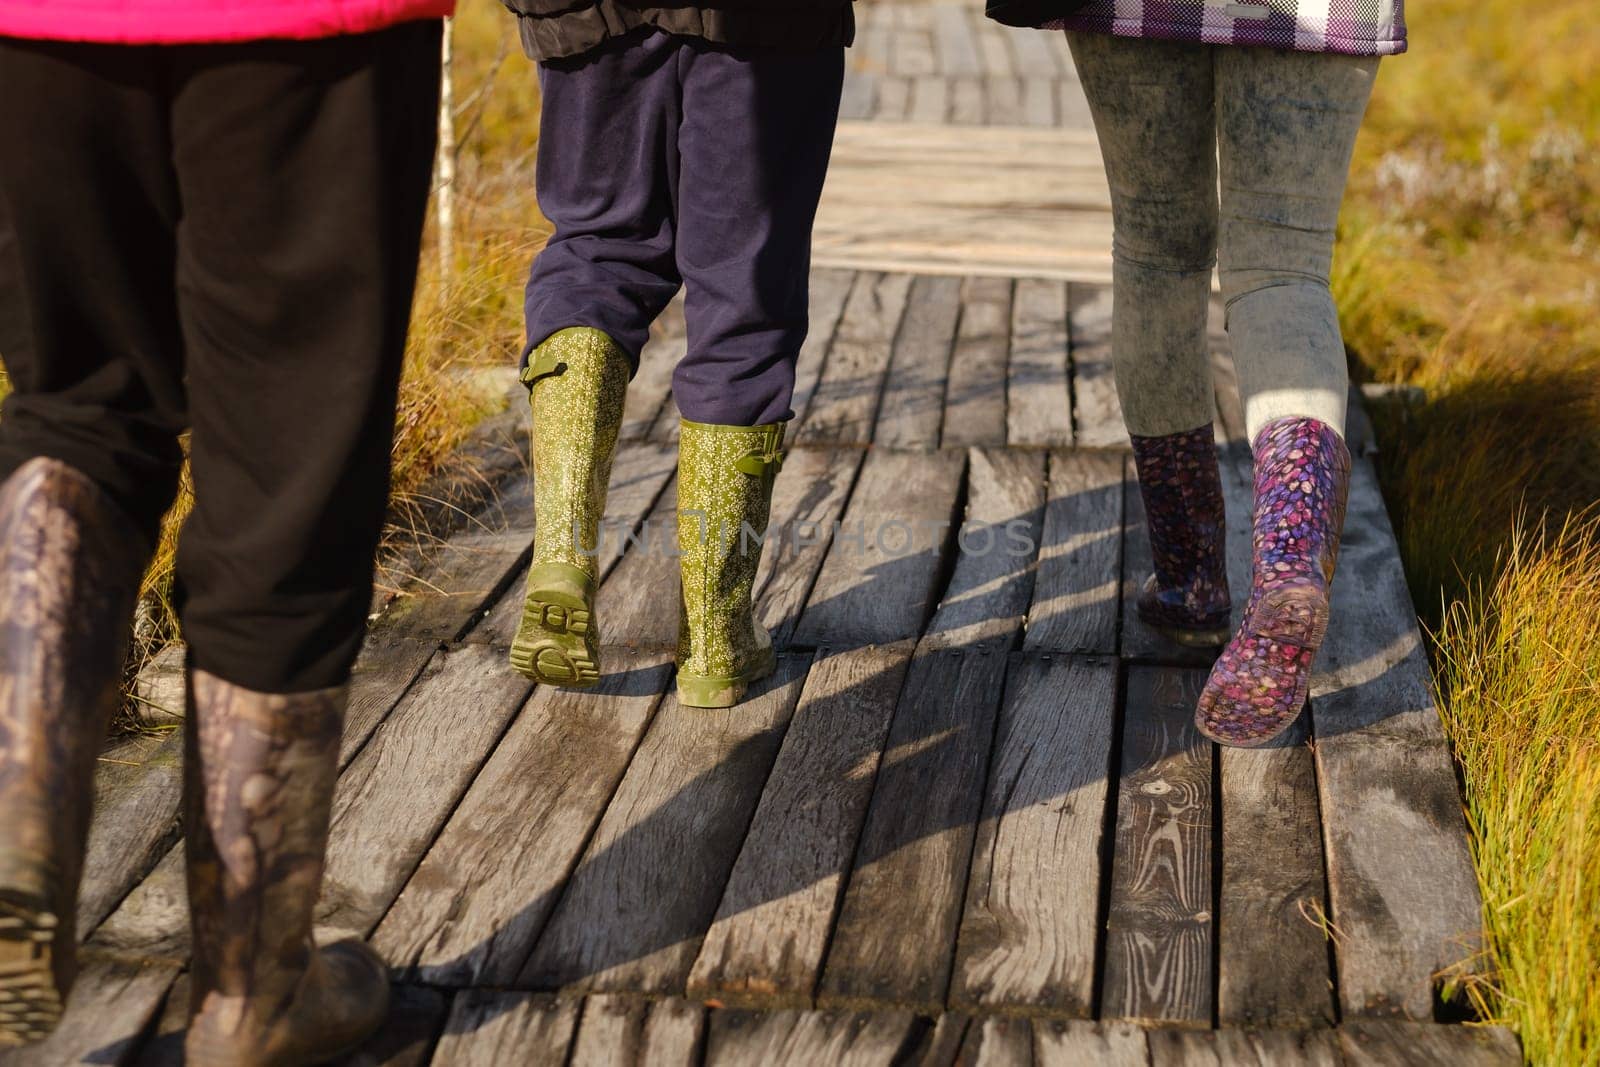 People in boots walk along a wooden path in a swamp in Yelnya, Belarus.